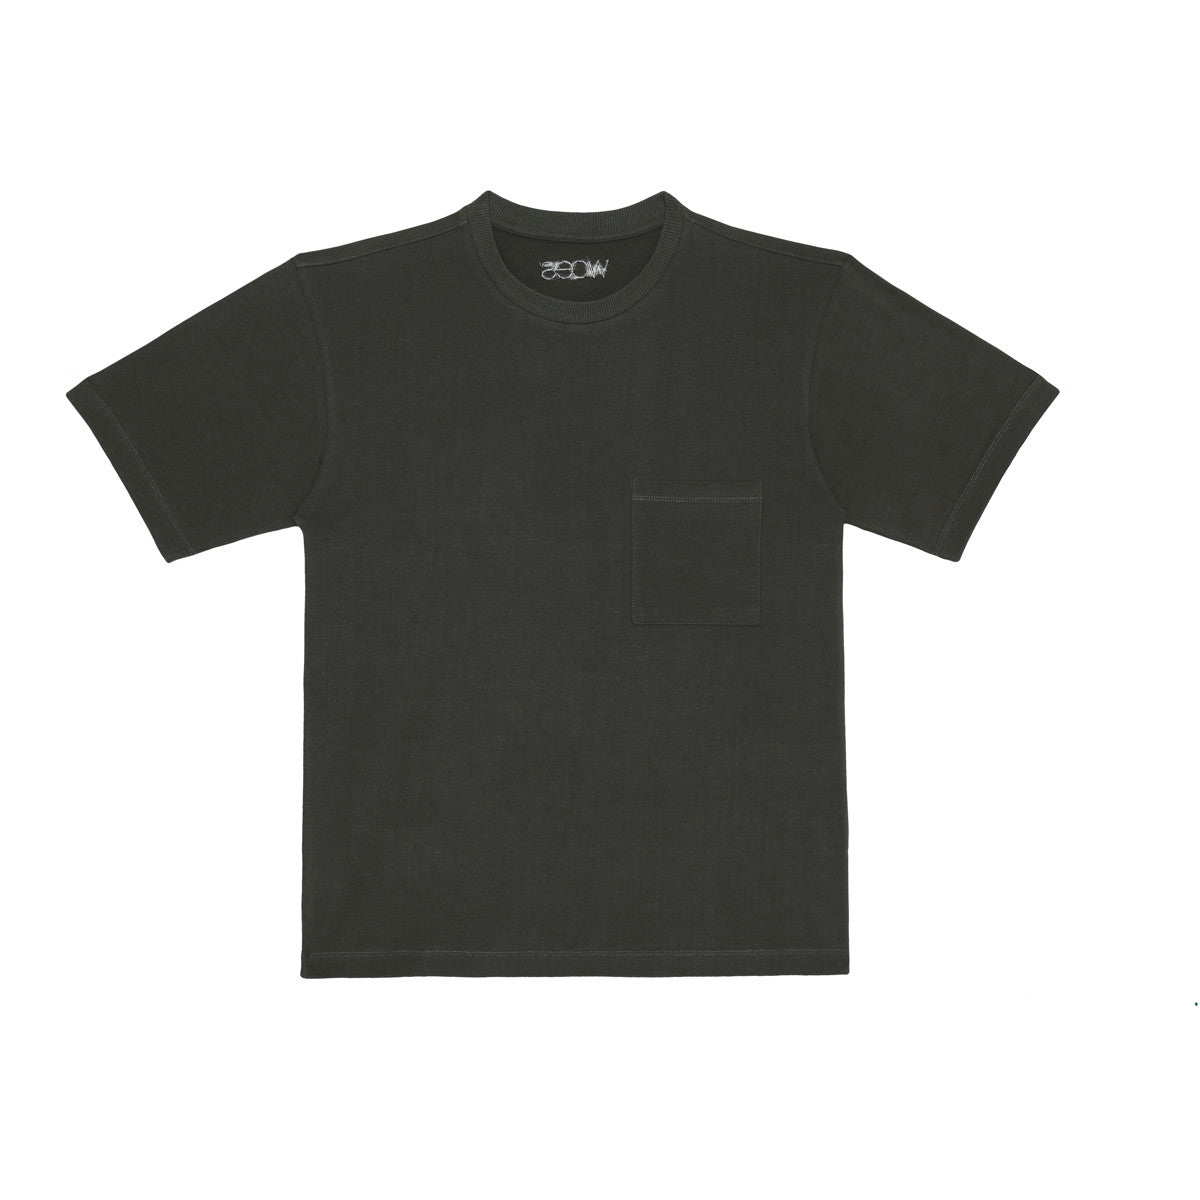 Our Little Hedonist round neck t-shirt in black is a populair essential. It has a relaxed-fit, has a pocket on the chest and is made from our premium organic cotton. The neckline is round and fitted, with short sleeves. It has bit oversized look.